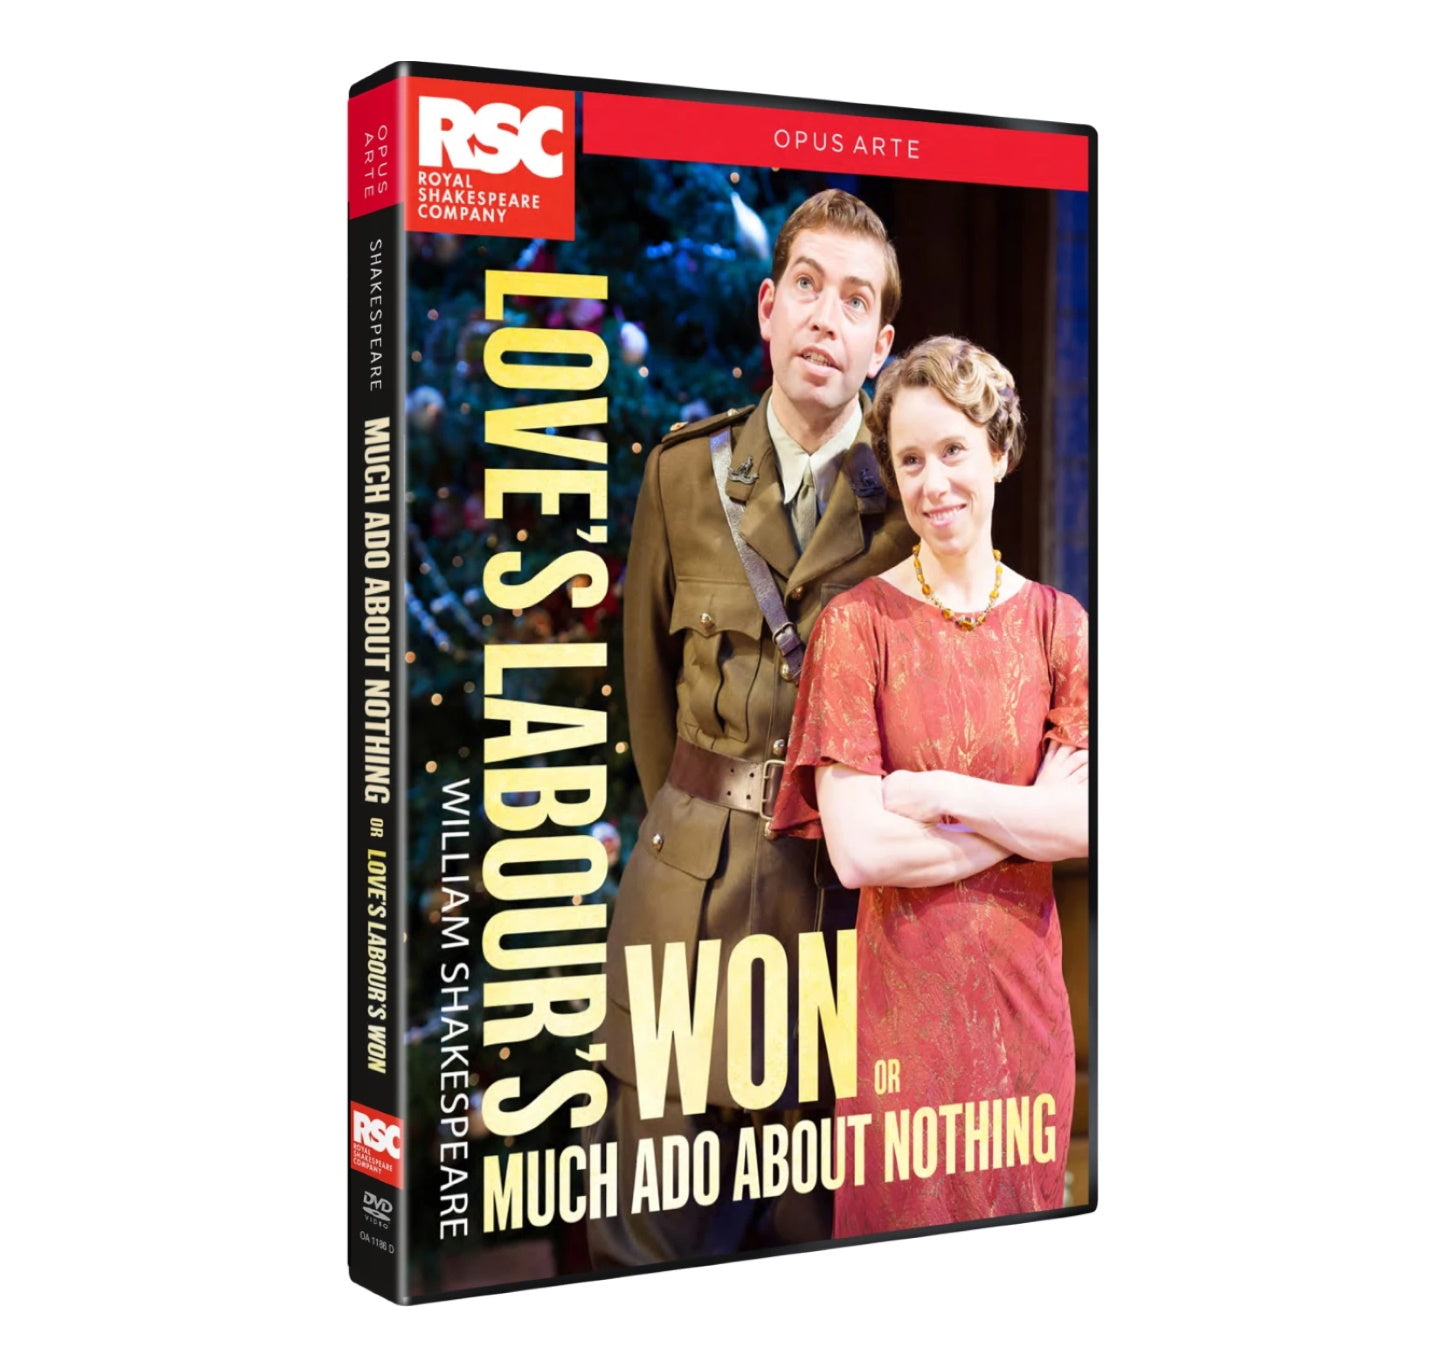 Love's Labour's Won or Much Ado About Nothing: RSC DVD (2015)